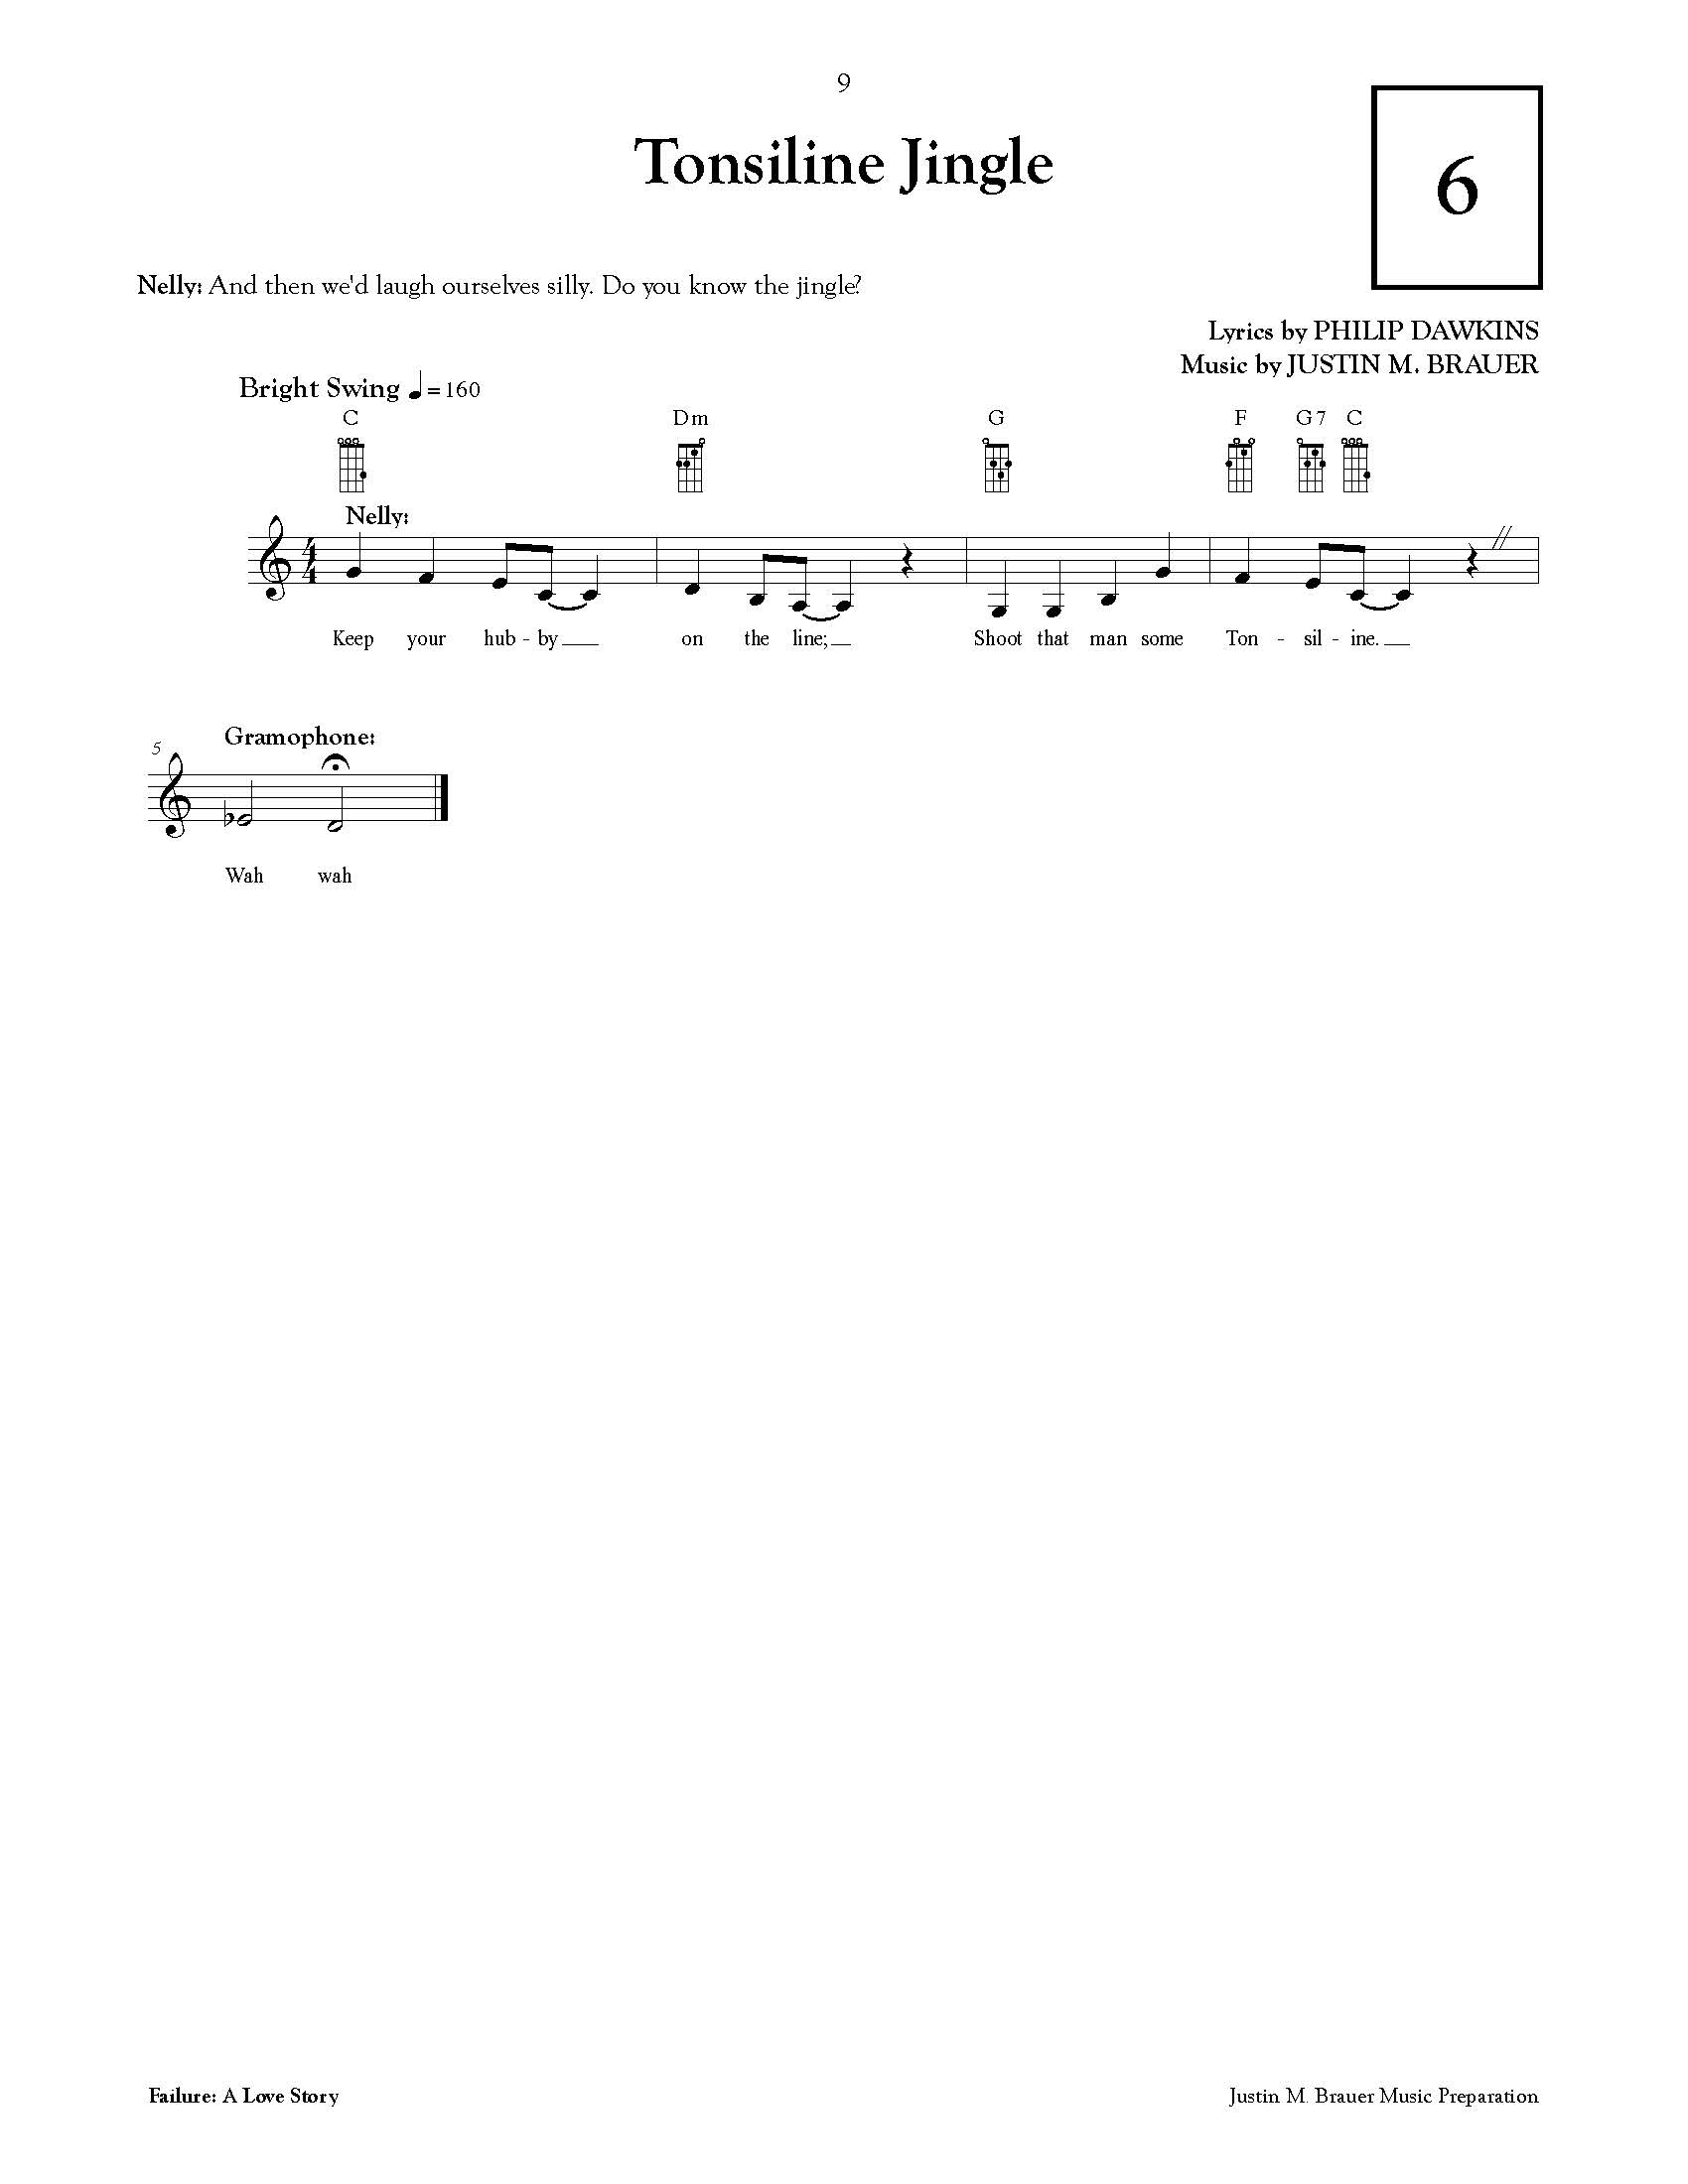 Failure A Love Story Vocal Score_Page_11.jpg